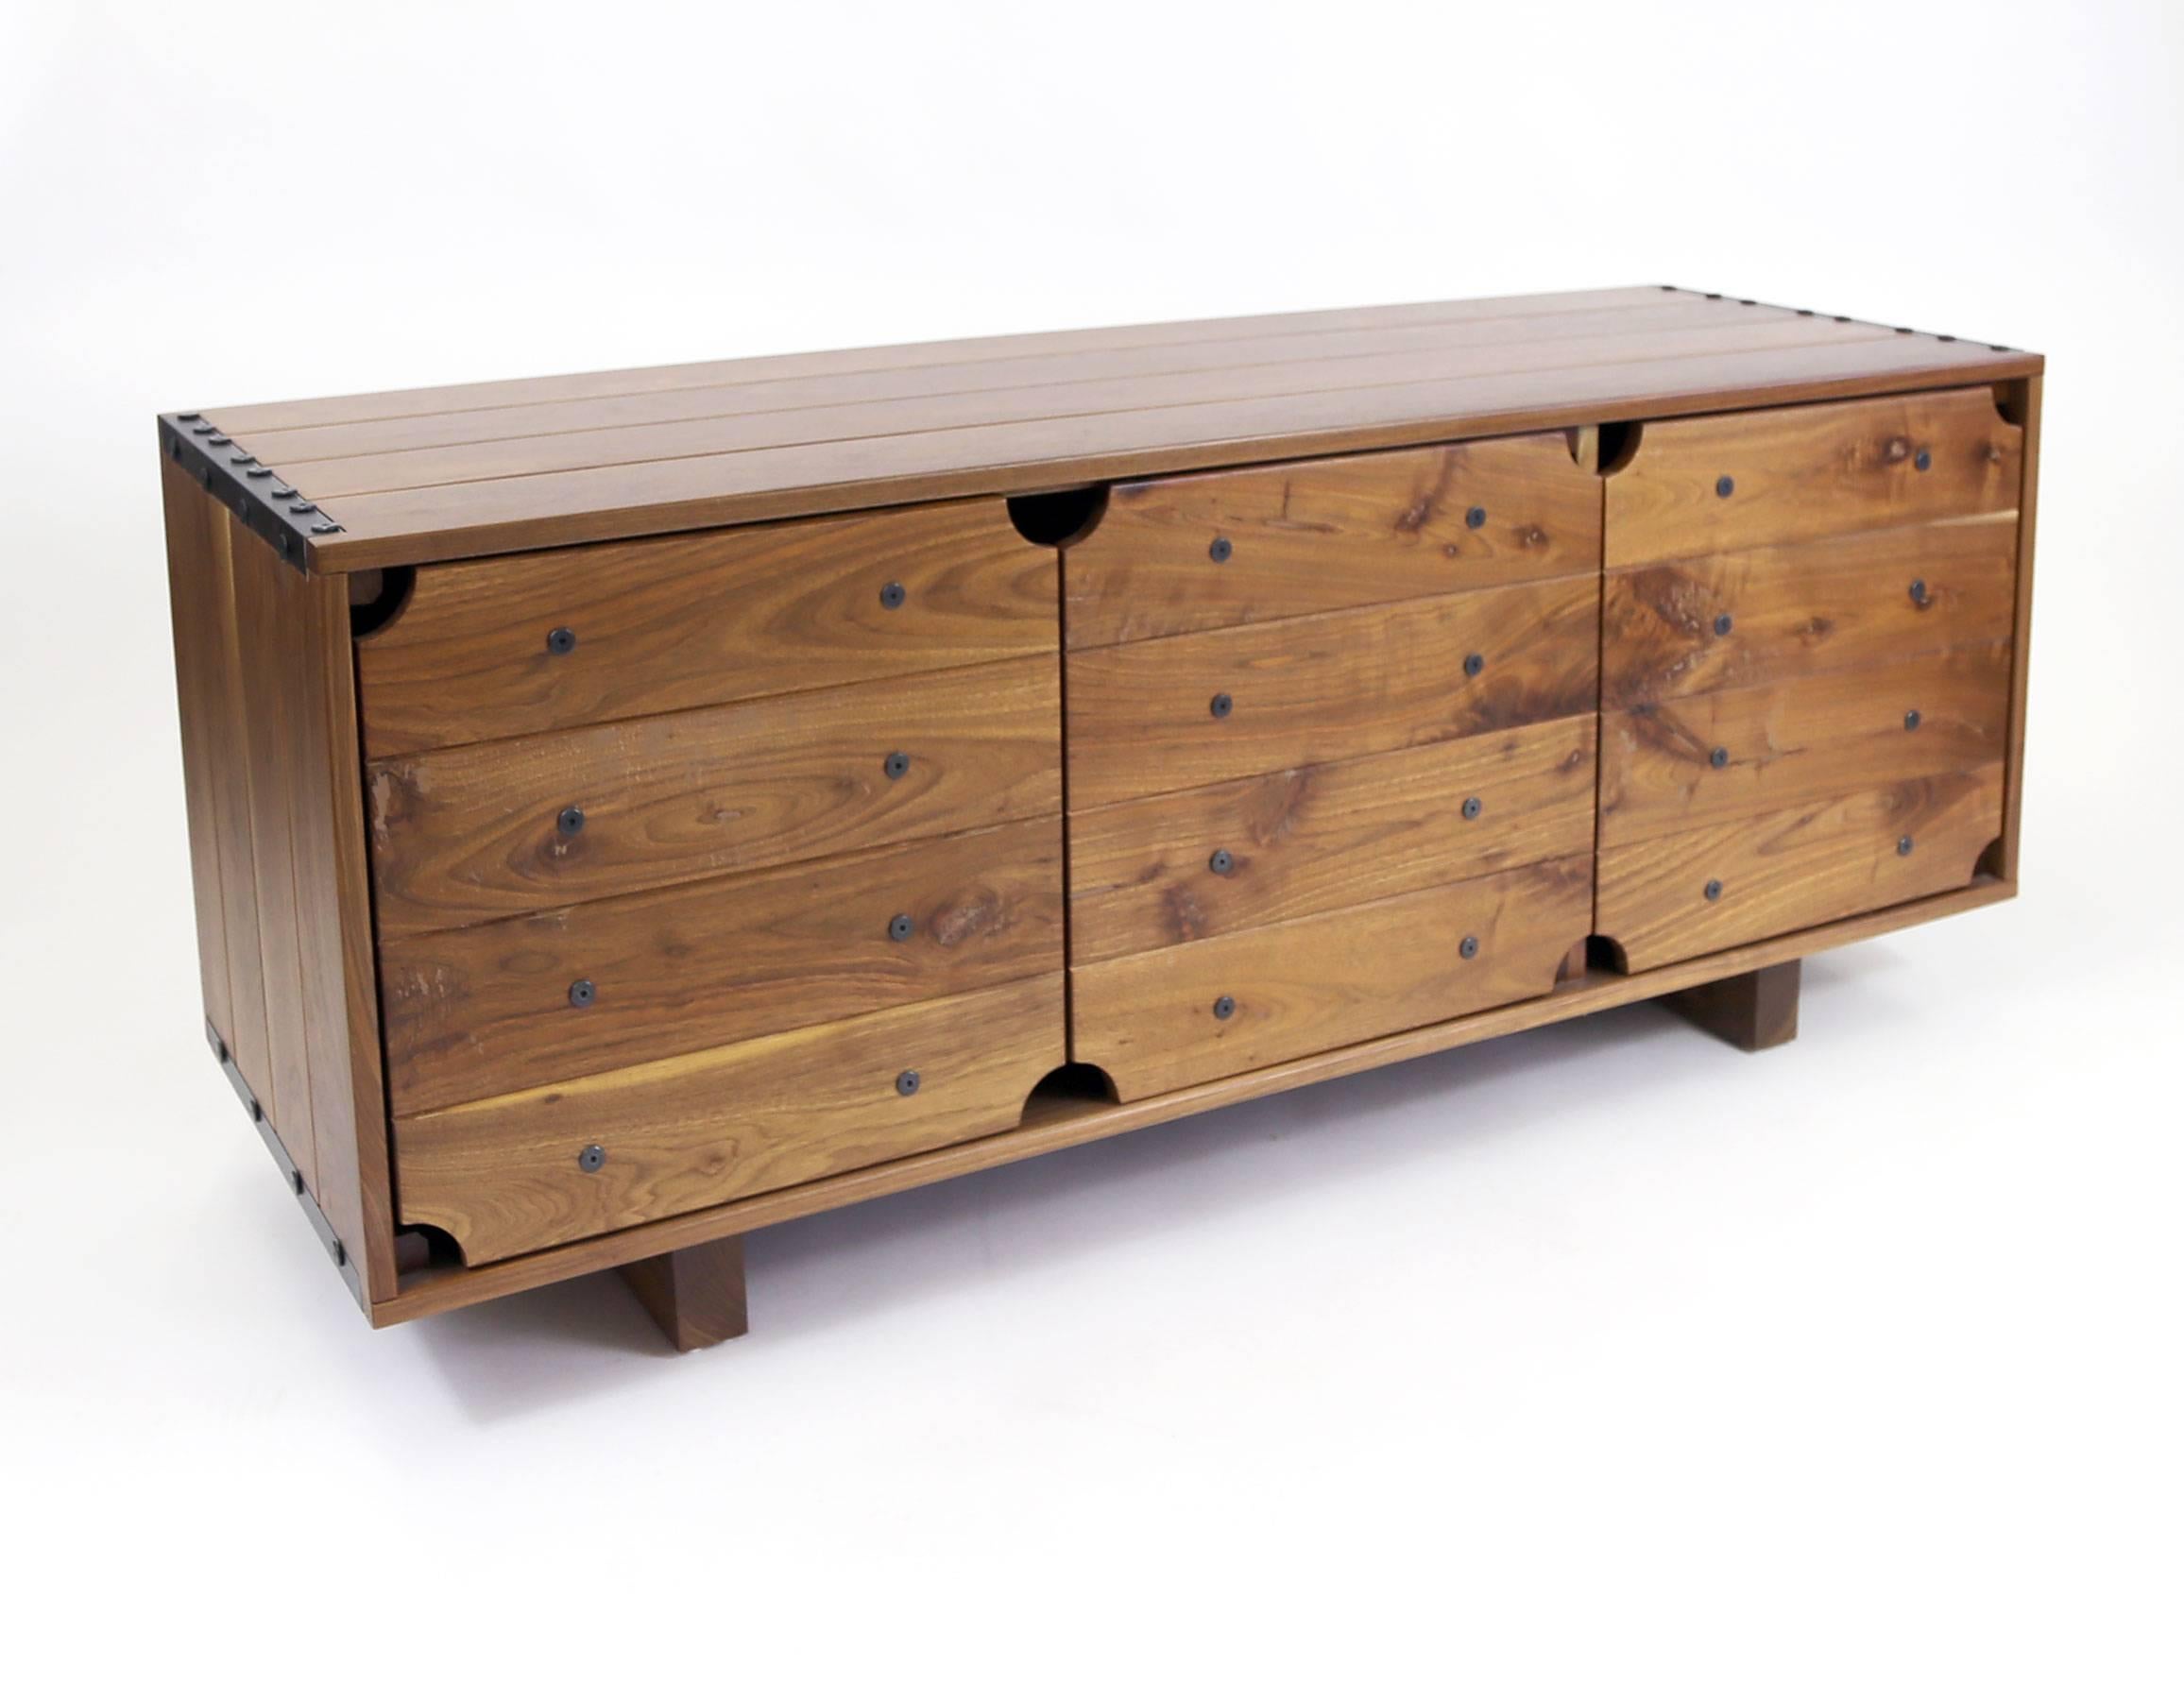 A simple credenza that hearkens back to an earlier time. Wooden battens (here, using black walnut) secured with steel braces and bolts hold everything together. The boards are eased with a slight gap between that compliments the primitive look of